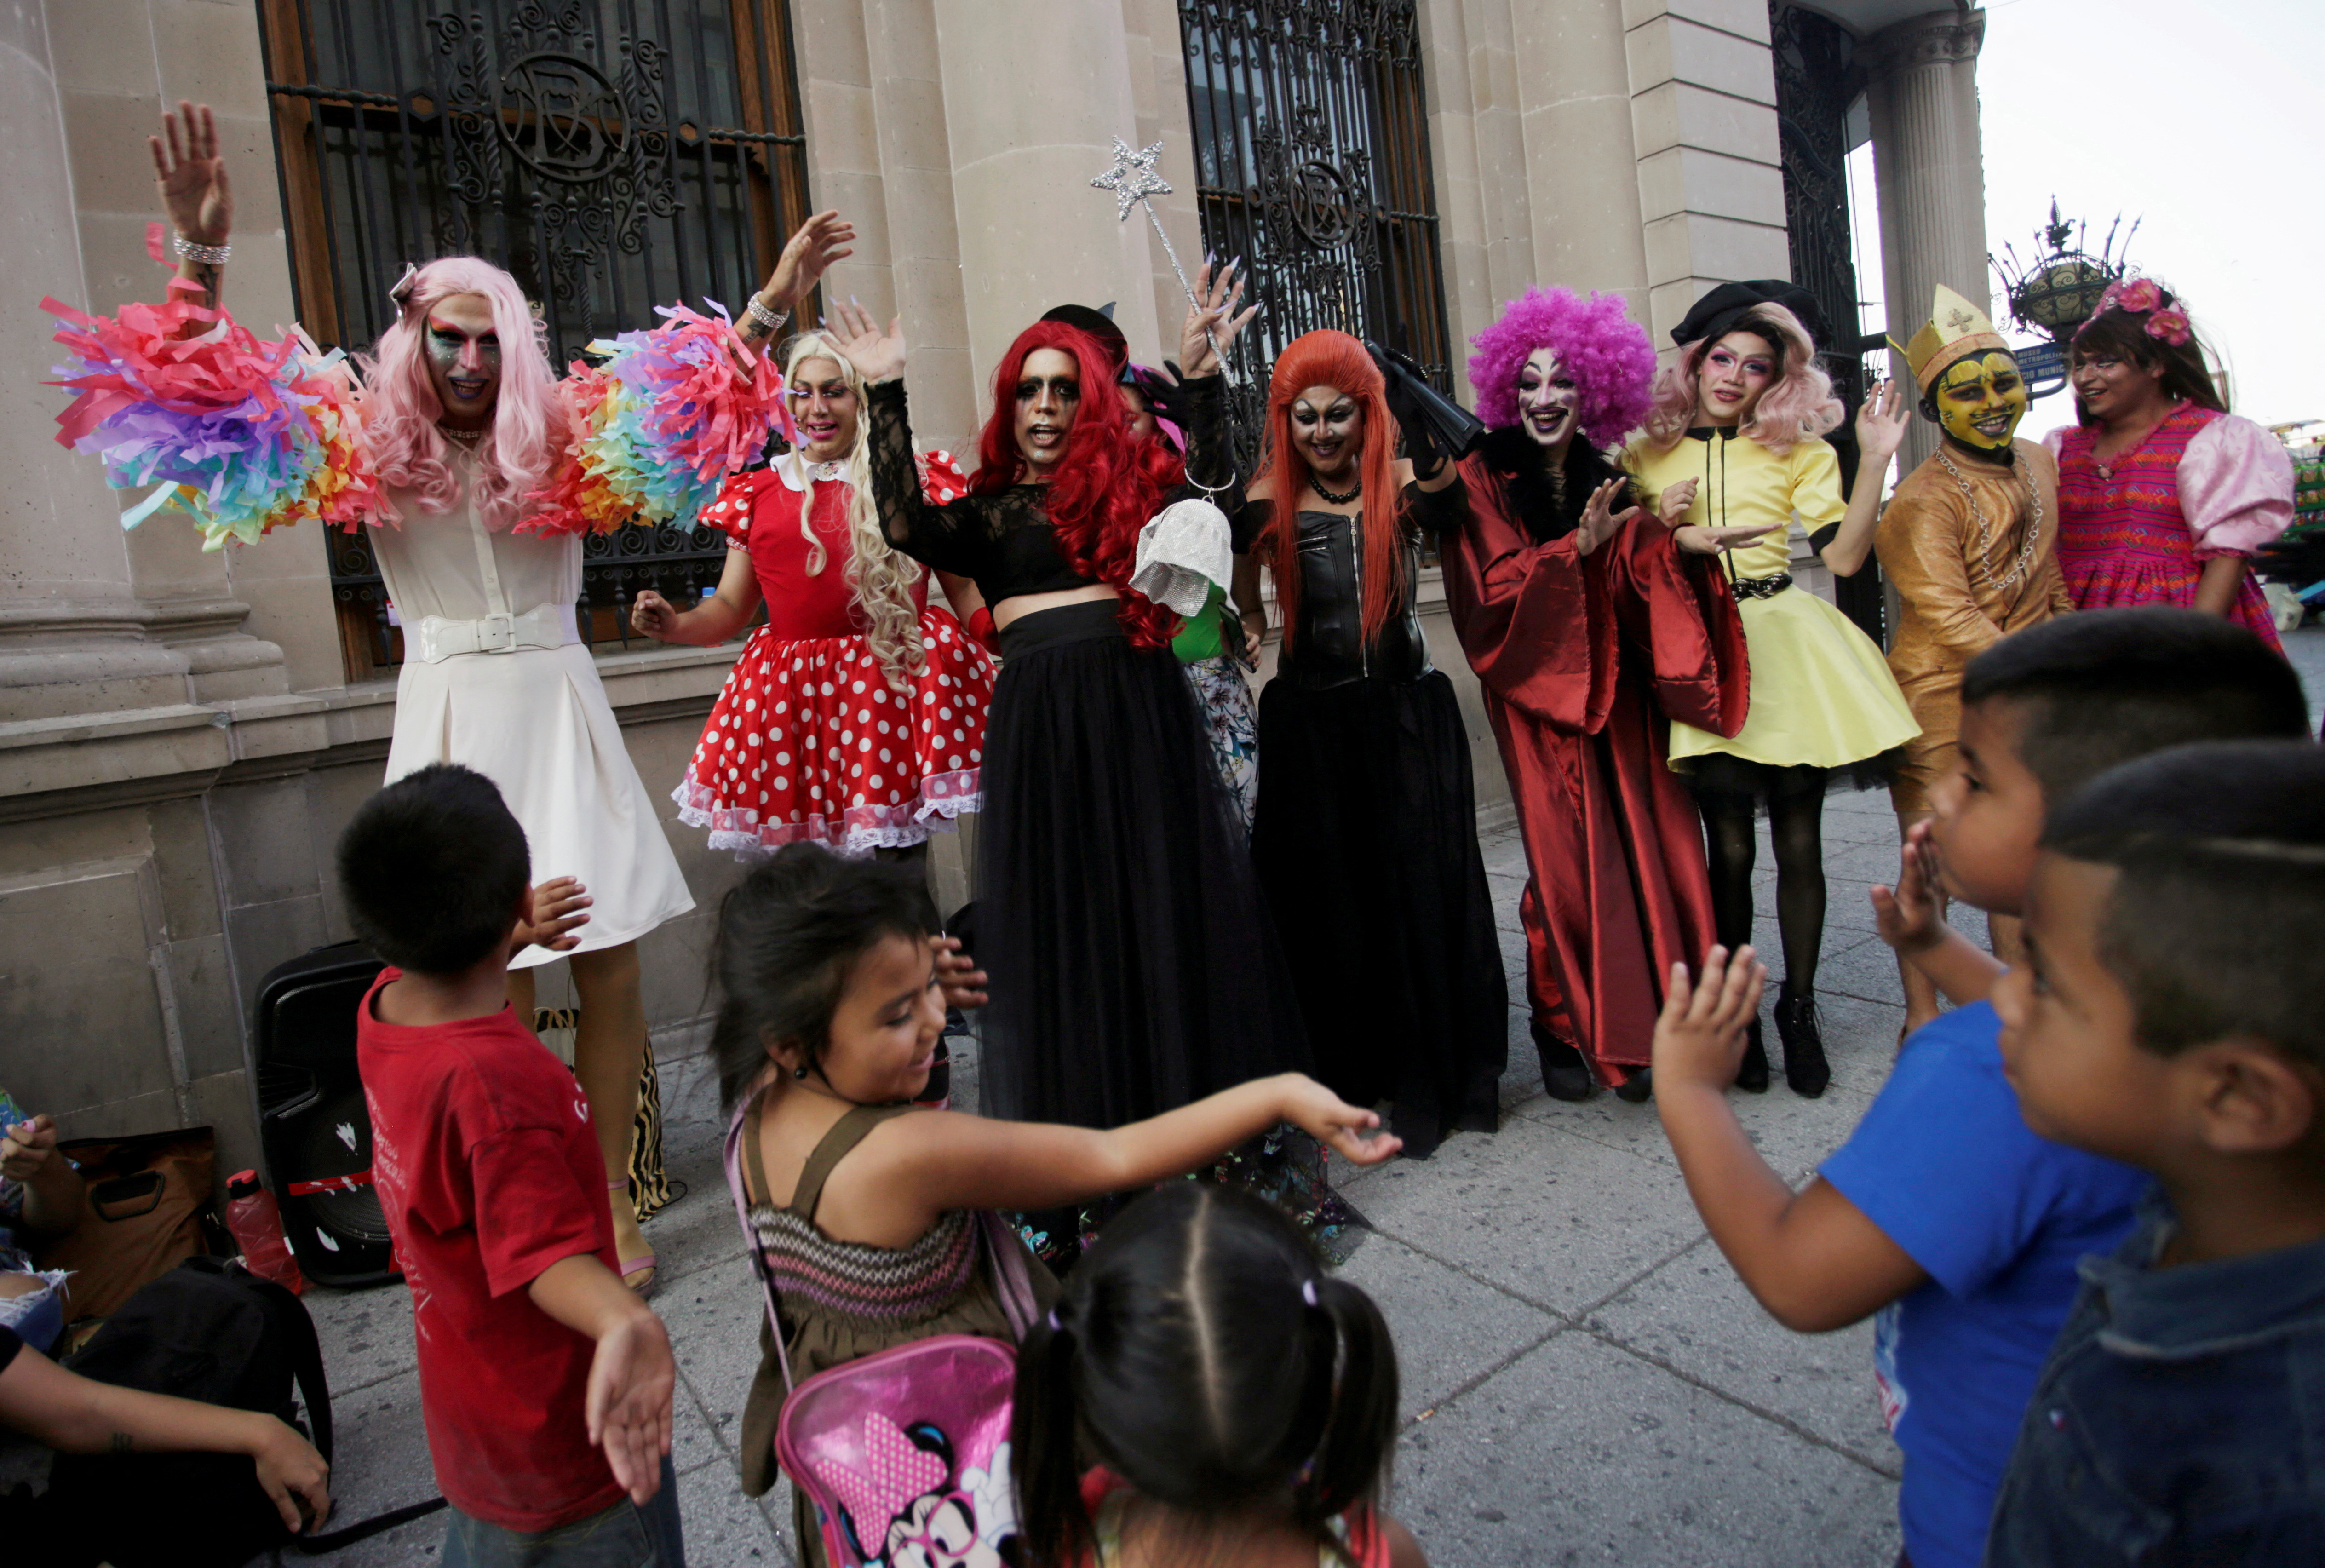 Participants dressed in drag dance along with children during the 